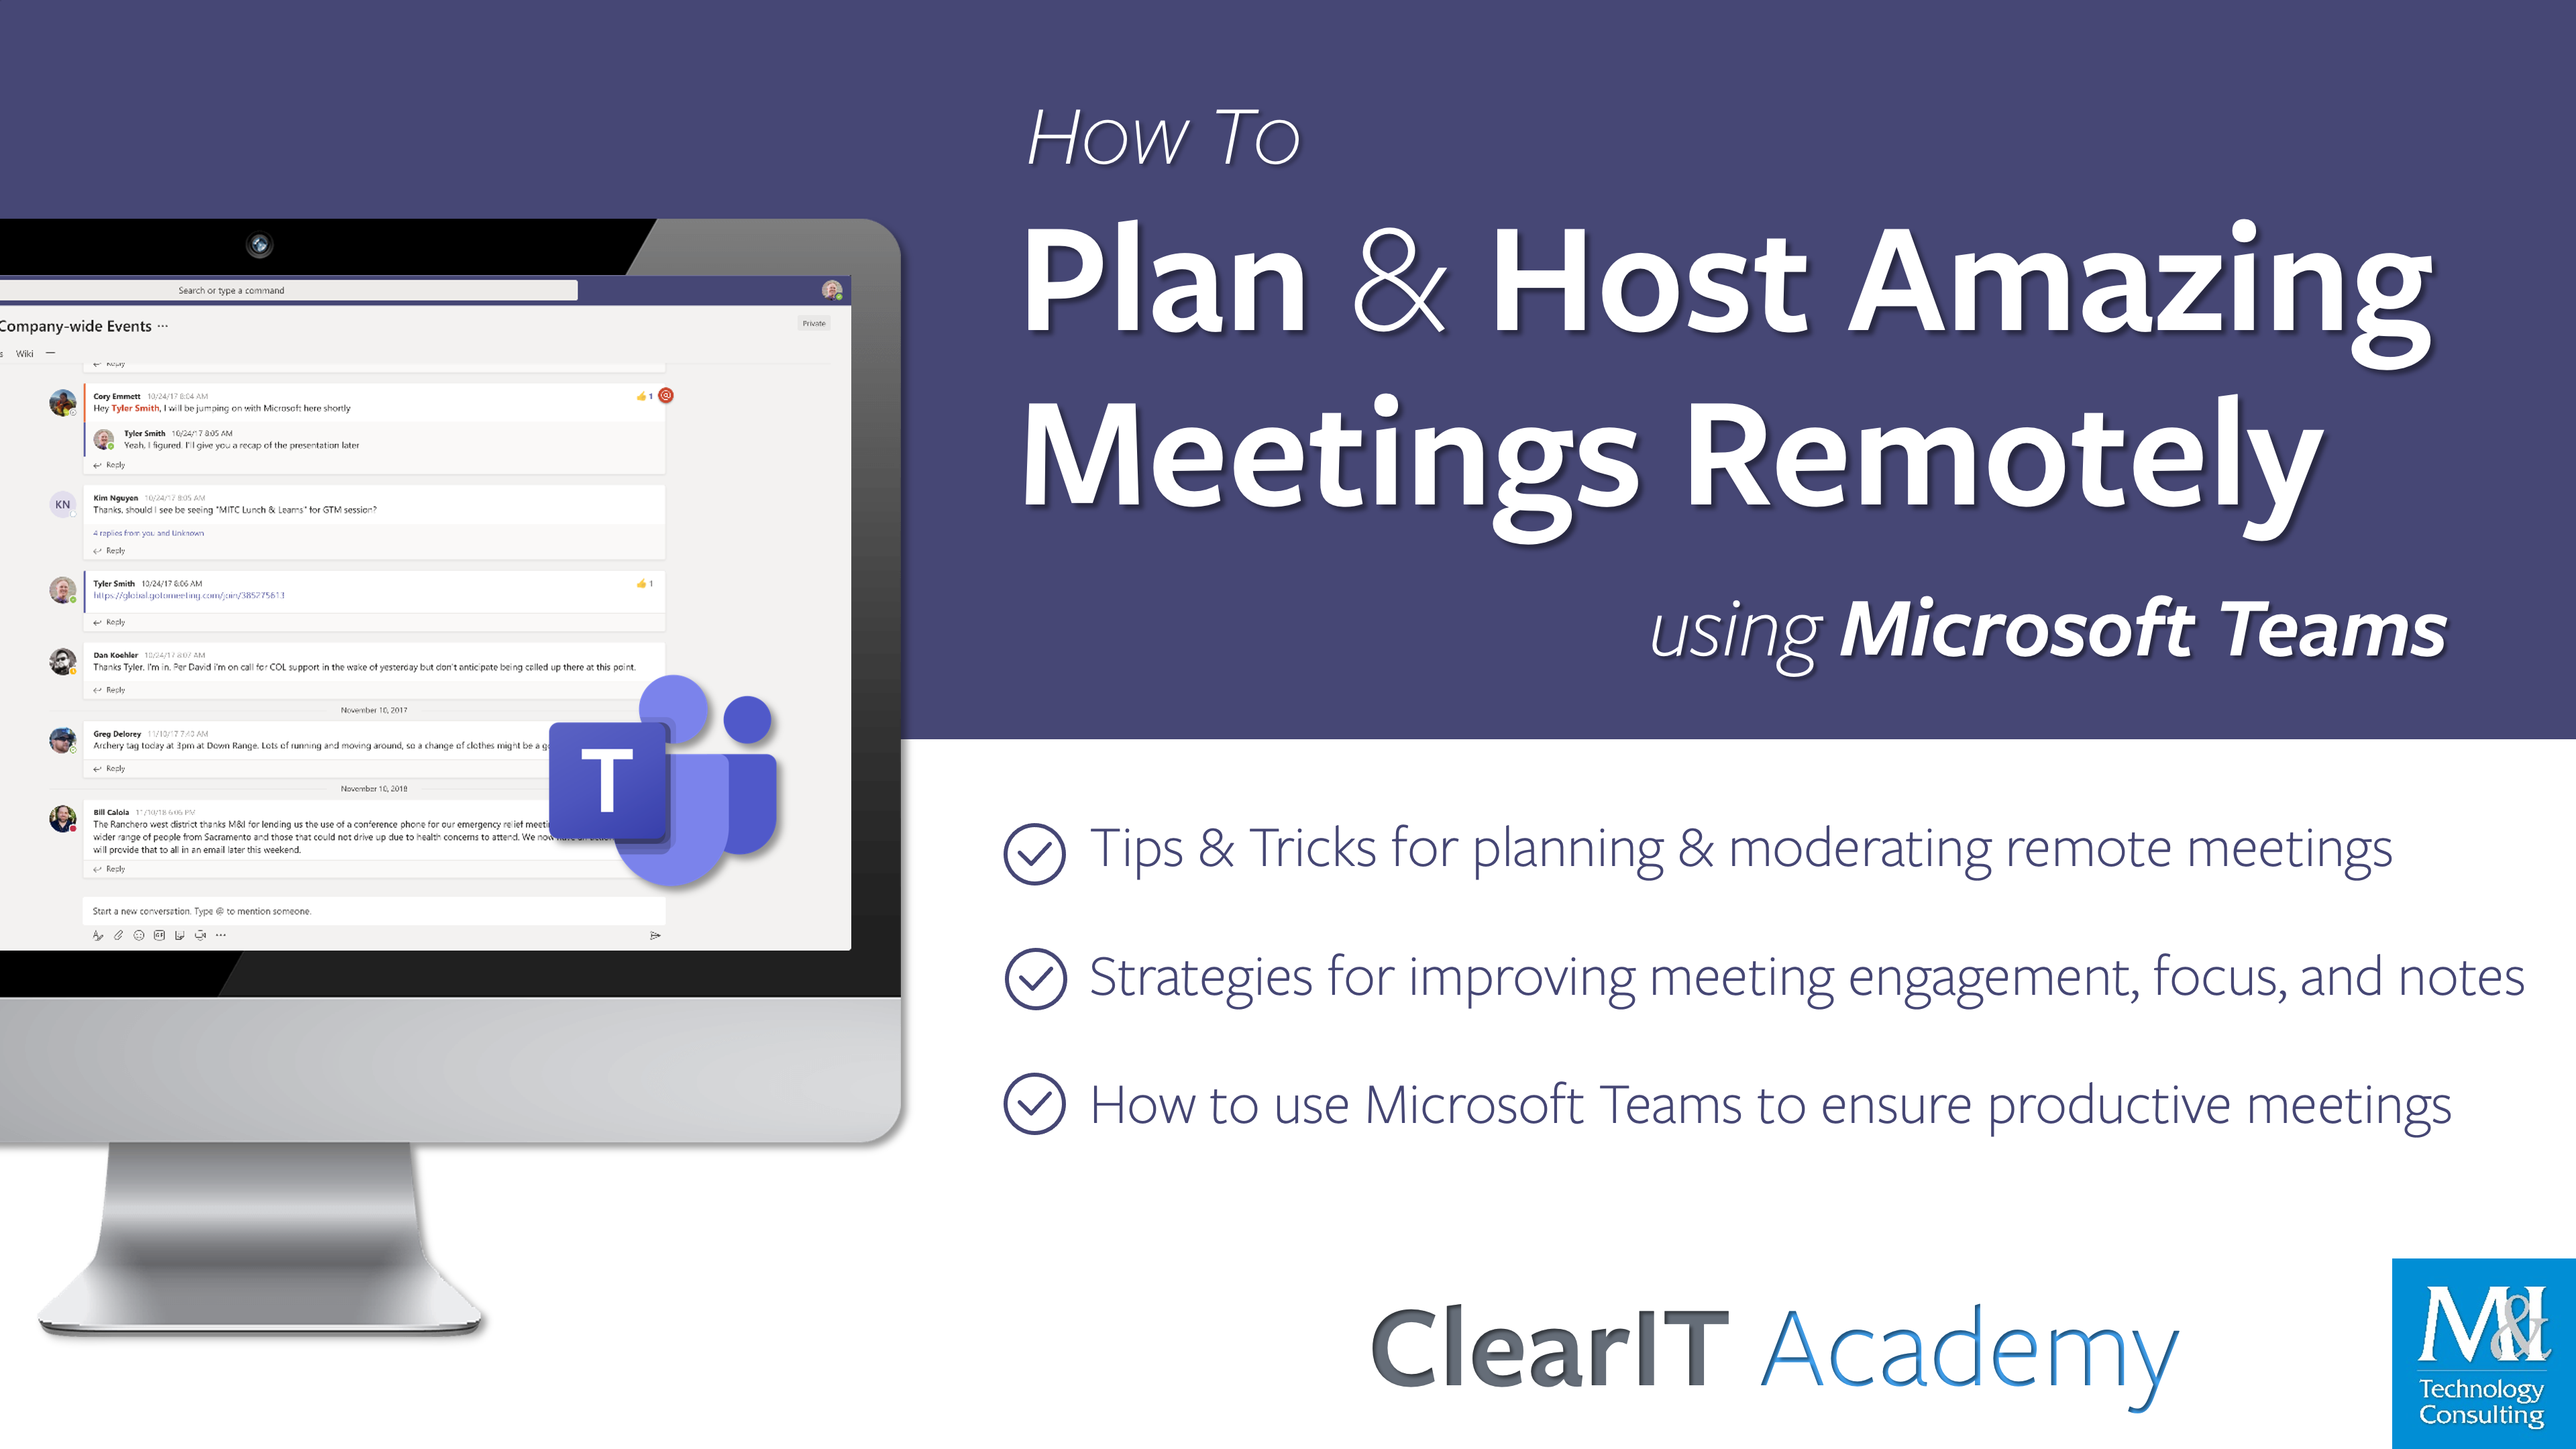 ClearIT Academy - How to Plan & Host Amazing Meetins Remotely using Microsoft Teams